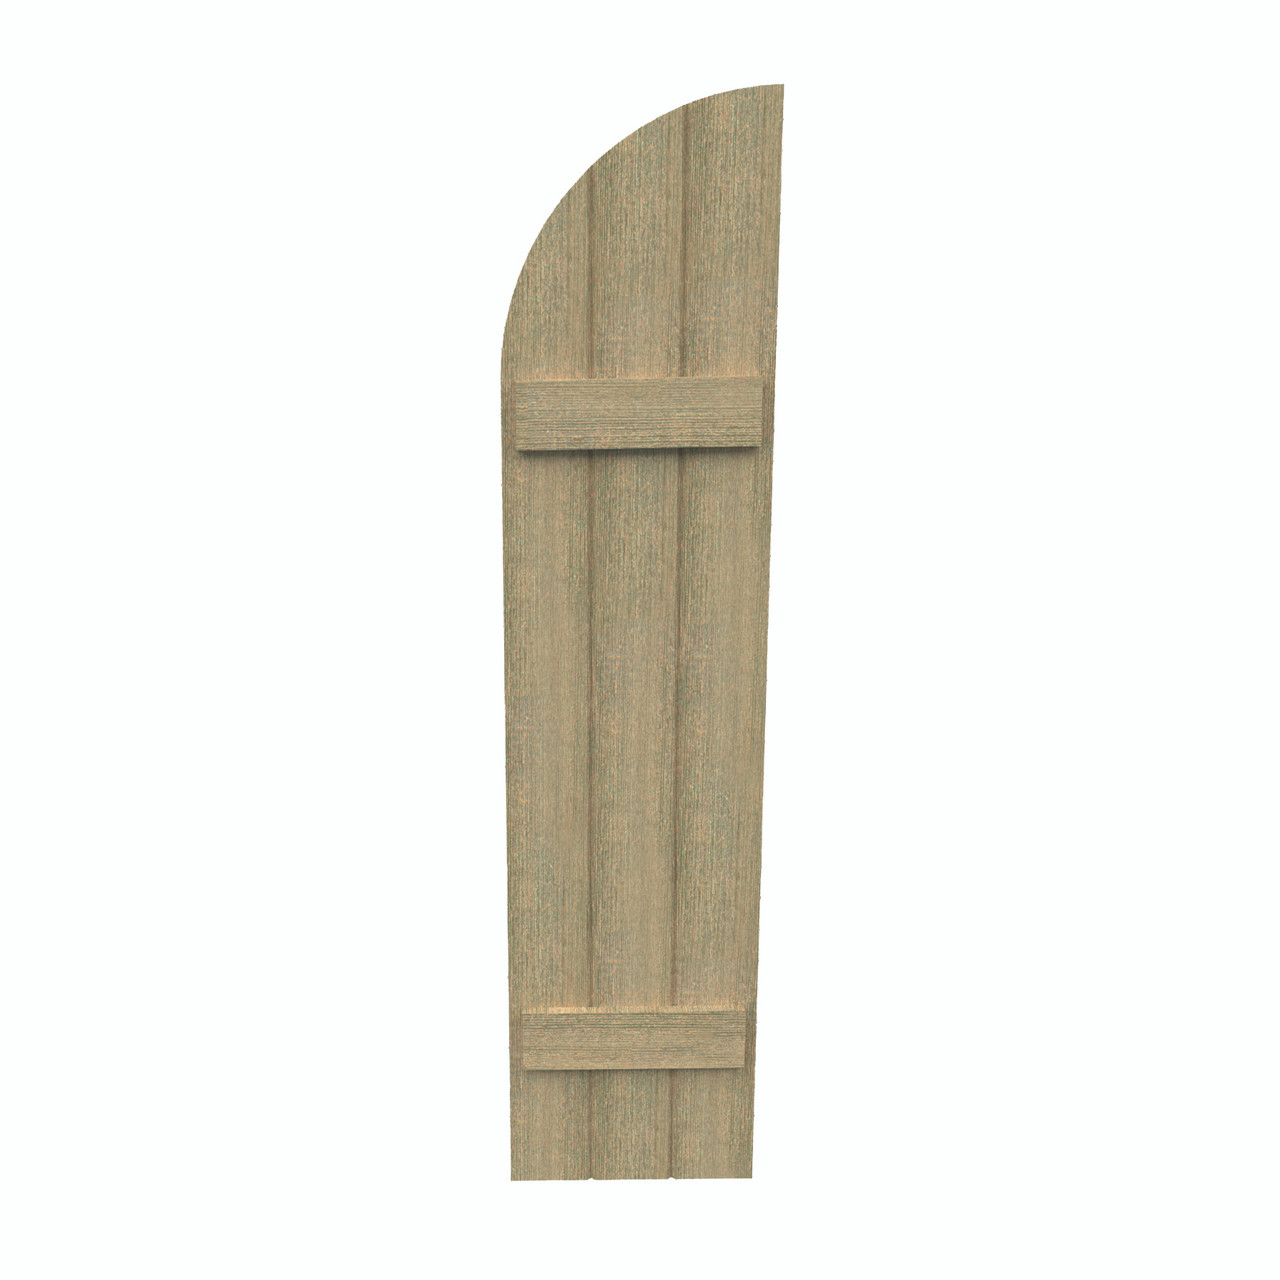 14 inch by 32 inch Quarter Round Shutter with 3-Boards